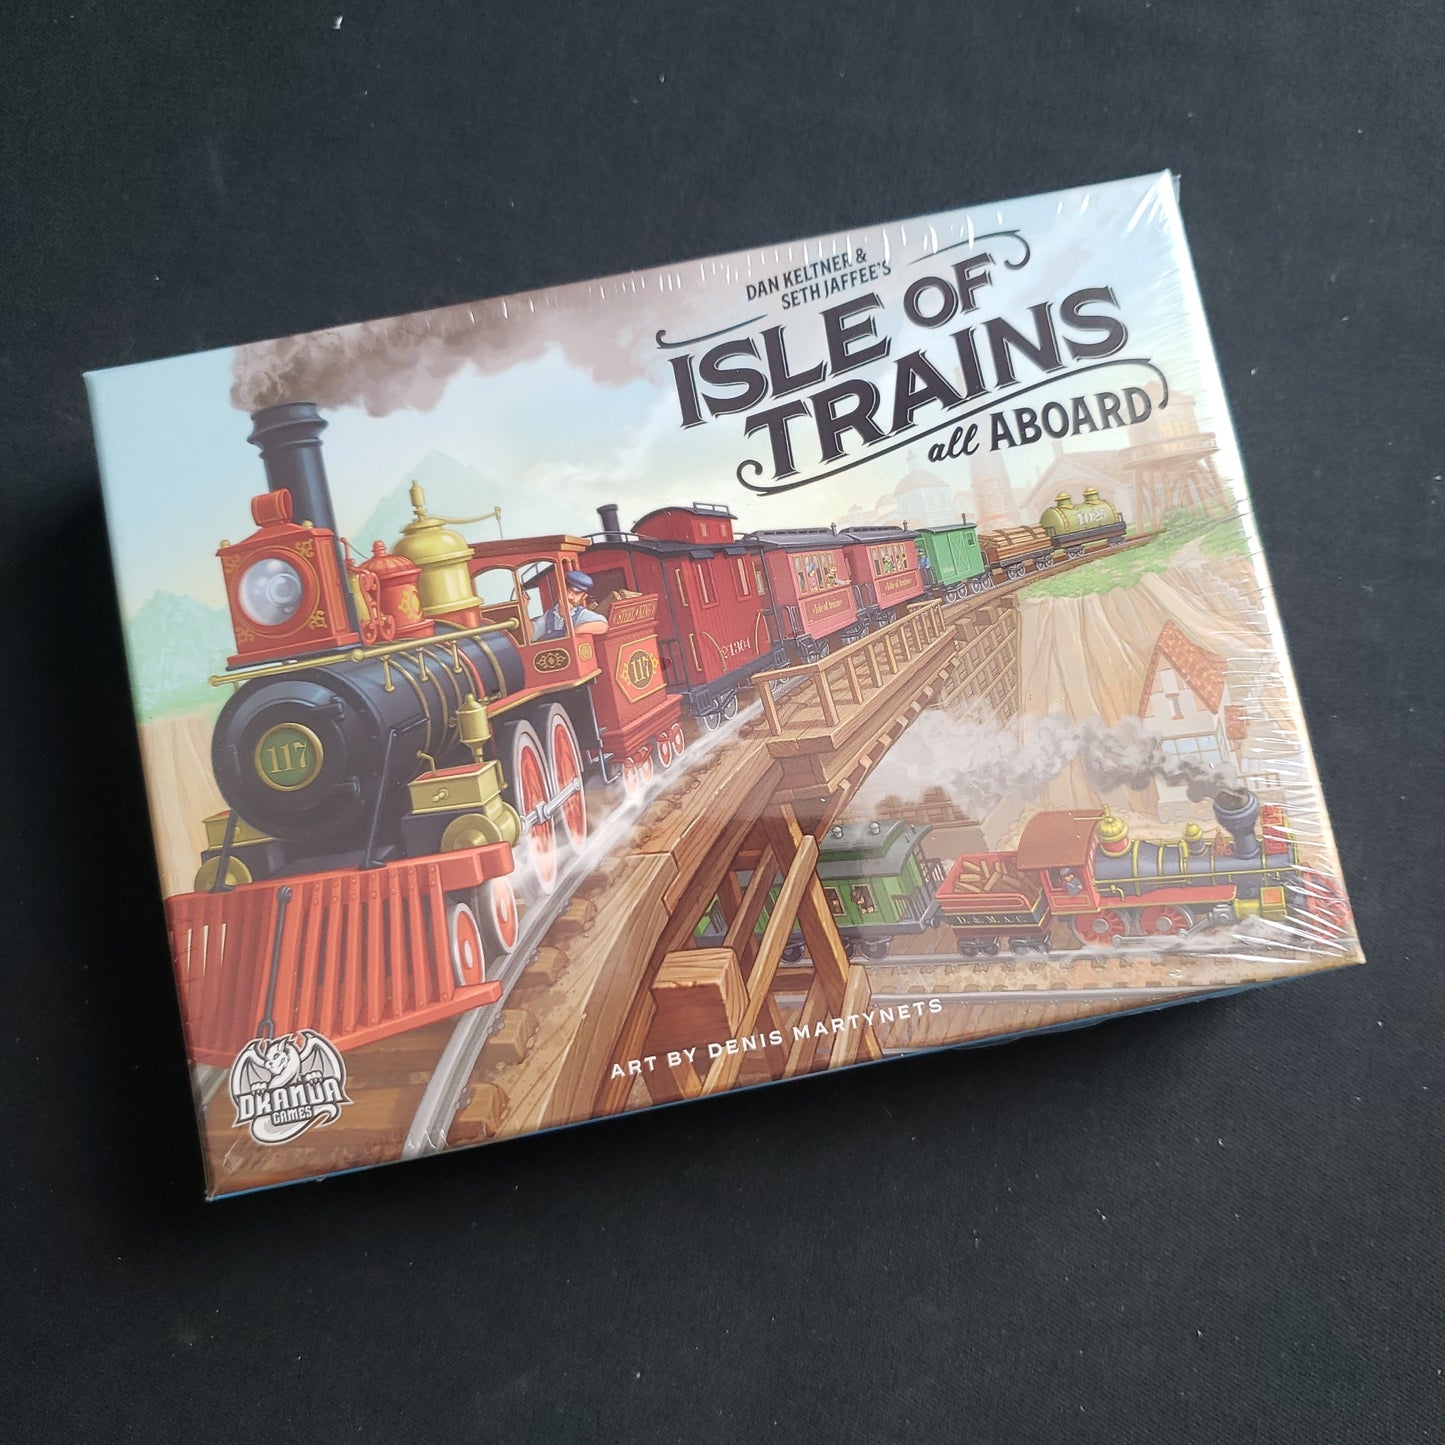 Image shows the front cover of the box of the Isle of Trains: All Aboard card game